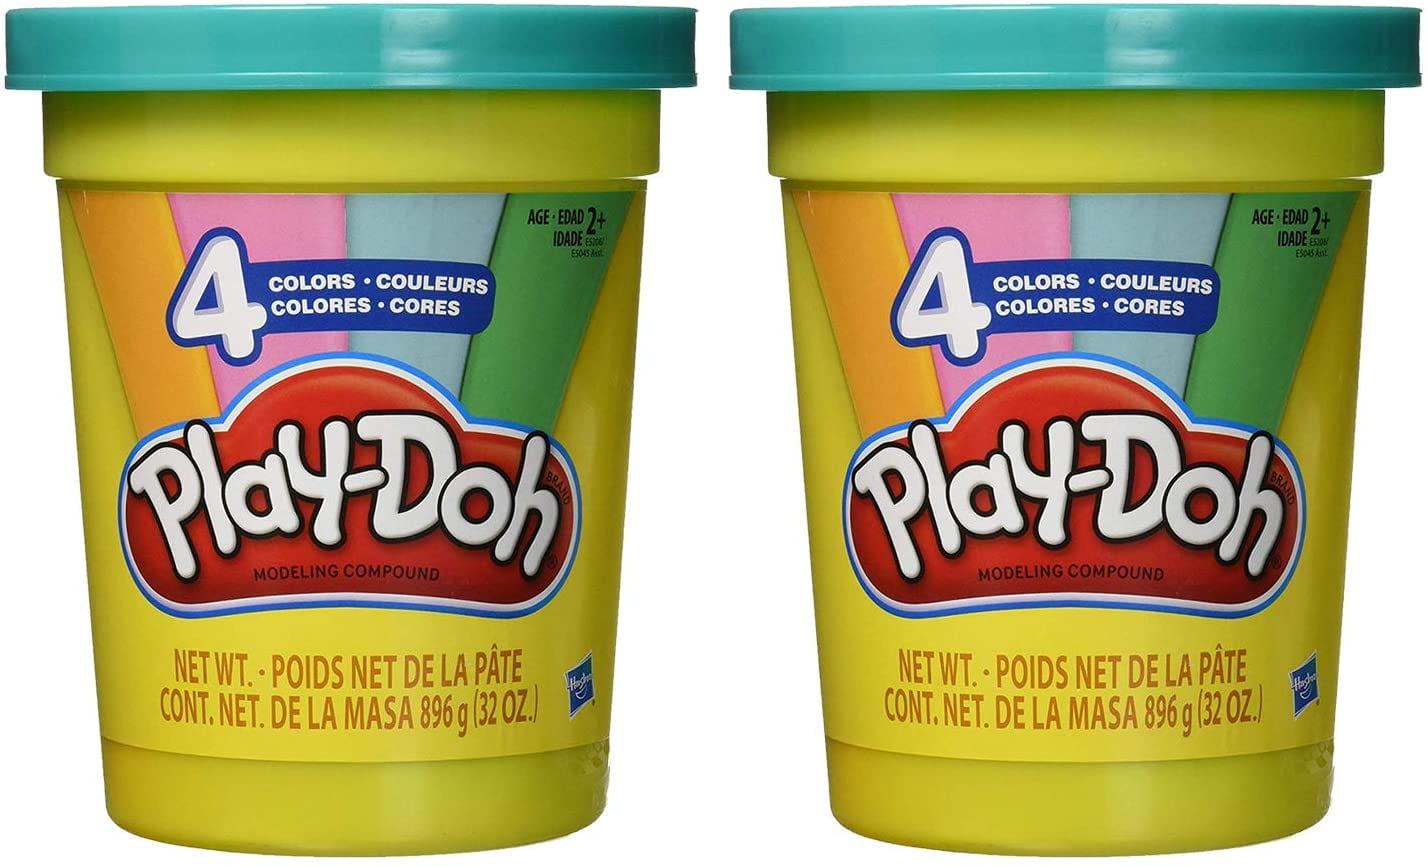 Bulk Super Can of Non-Toxic Modeling Compound with 4 Classic Play-Doh 2-Lb 